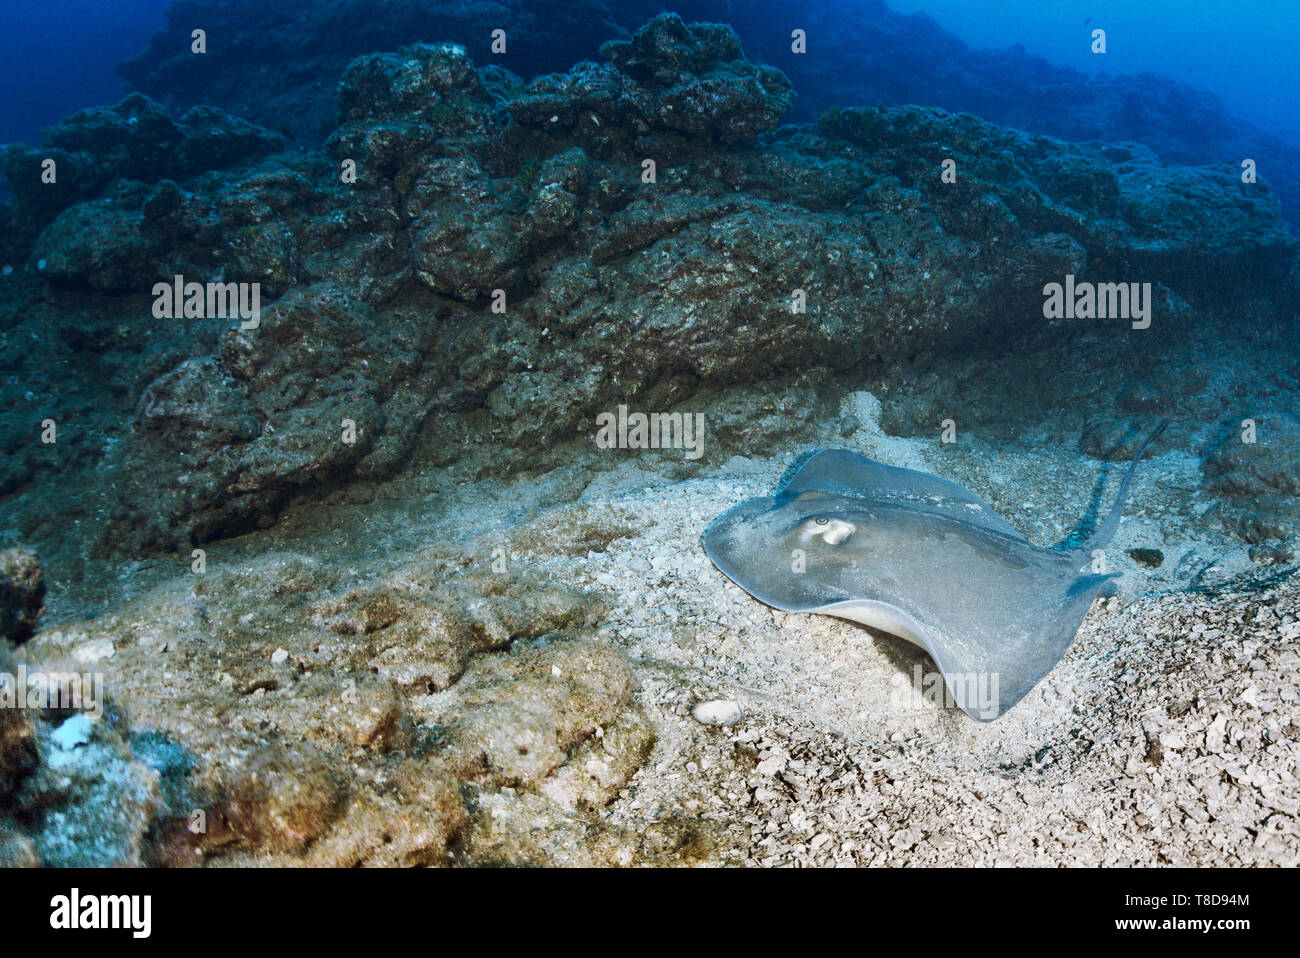 The common stingray (Dasyatis pastinaca) is swimming over the sand patch through the underwater scenery of Revillagigedo Archipelago Stock Photo